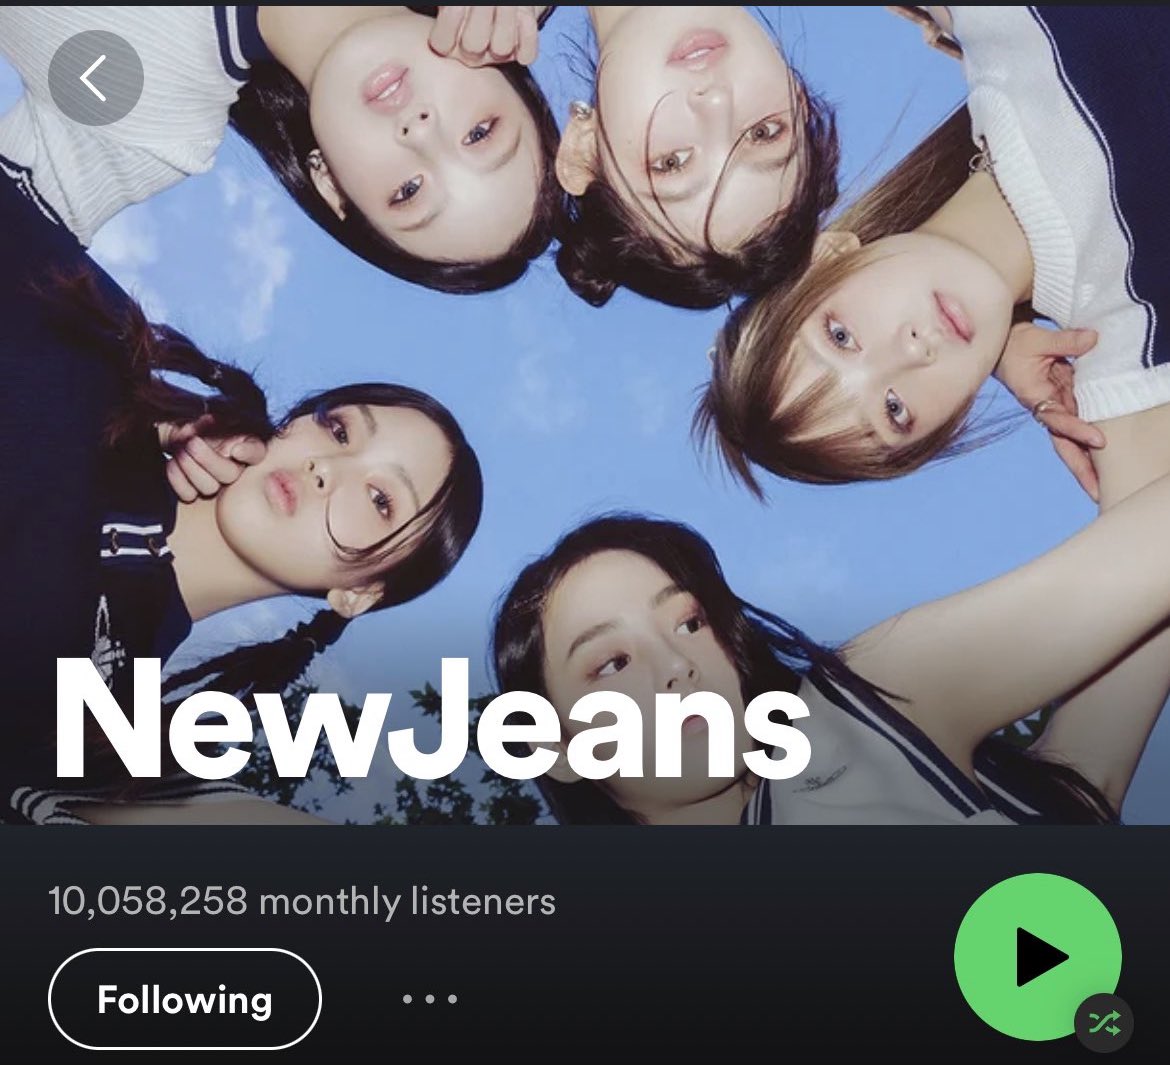 Such an achievement by @NewJeans_ADOR , 10M monthly @Spotify listeners in less than 2 months from their debut! A pleasure to be involved with ”Attention” from @CosmosMusic , Thanks to Beast and Natives Alike, Hanna Cho, producer 250, @alldoorsoneroom, Duckbay ❤️🙏🏻 #NewJeans